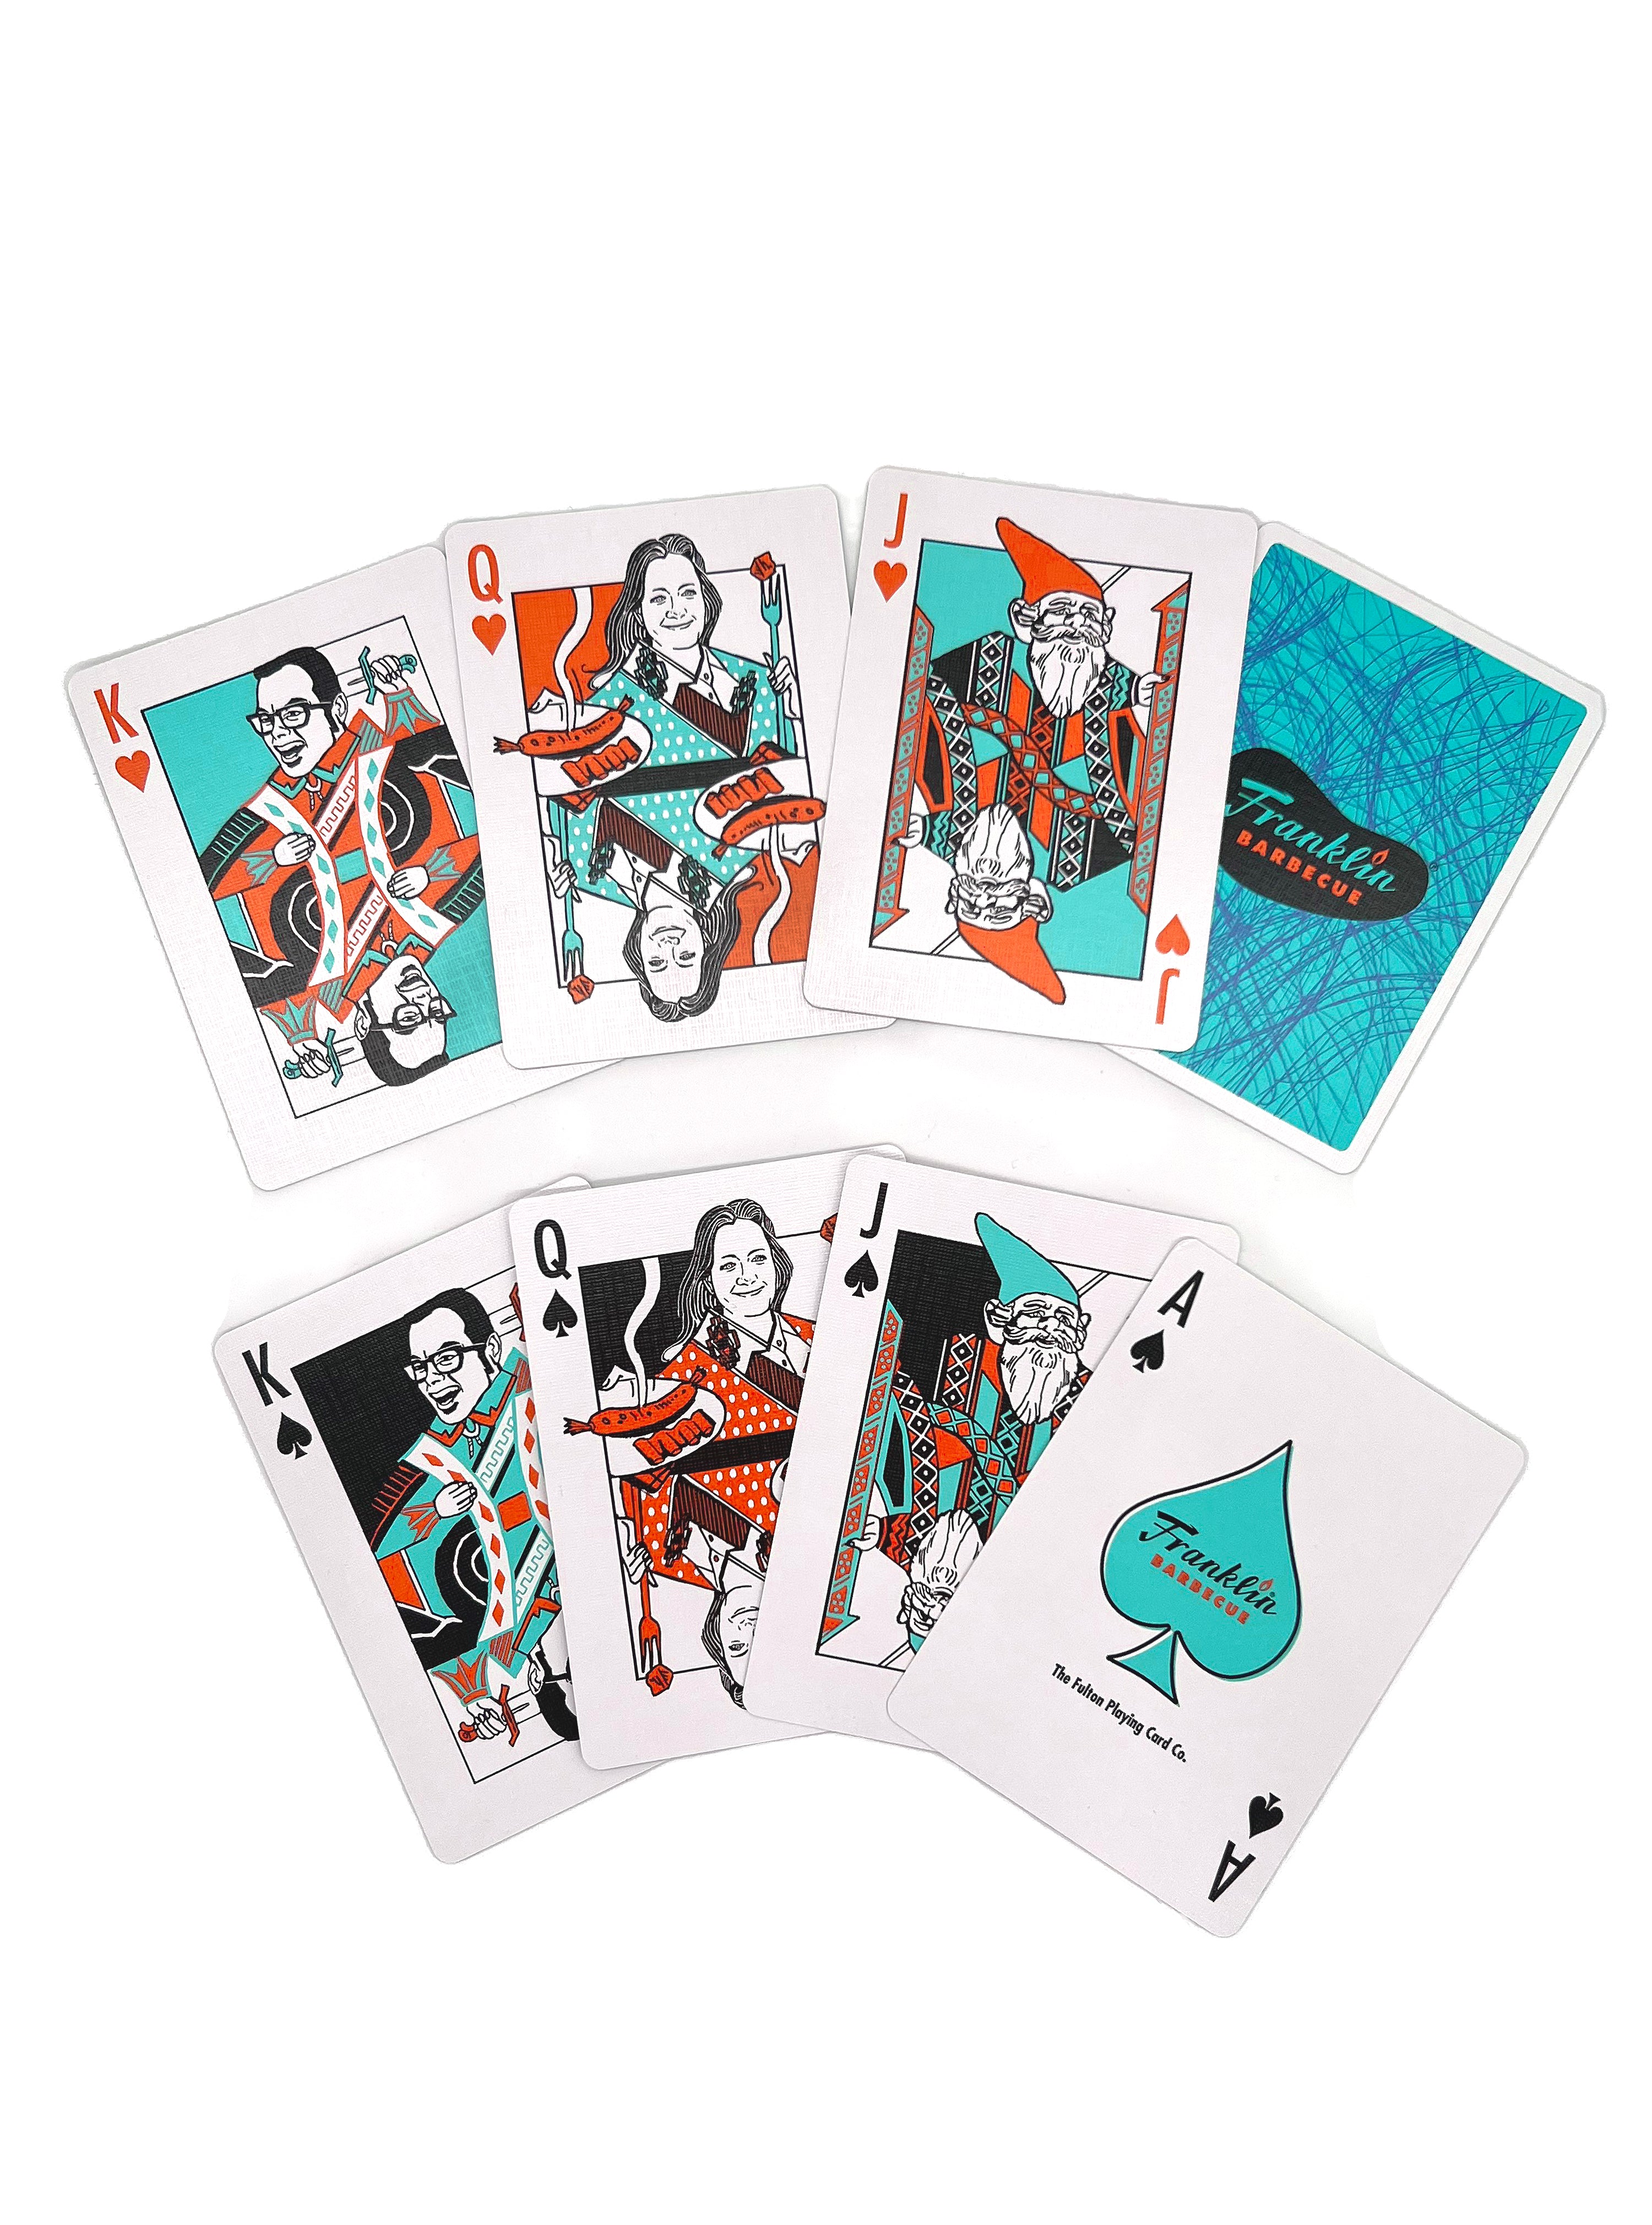 Face cards displayed. King card is Aaron Franklin, Queen  Card is Stacy Franklin, Joker card is a gnome, Ace card is the Franklin Barbecue bean logo 